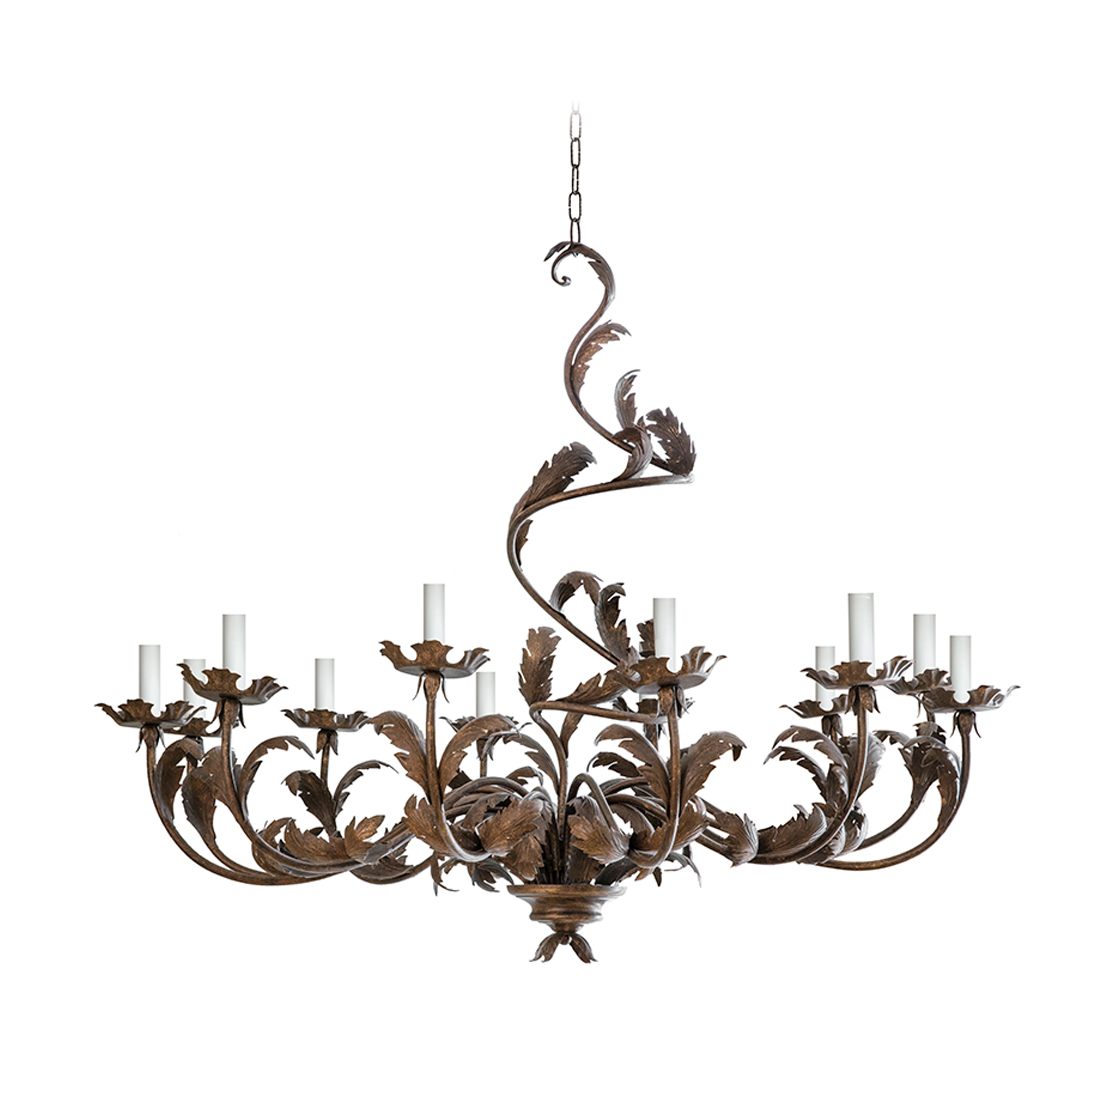 Large Borghese chandelier in Wrought iron - Beaumont & Fletcher